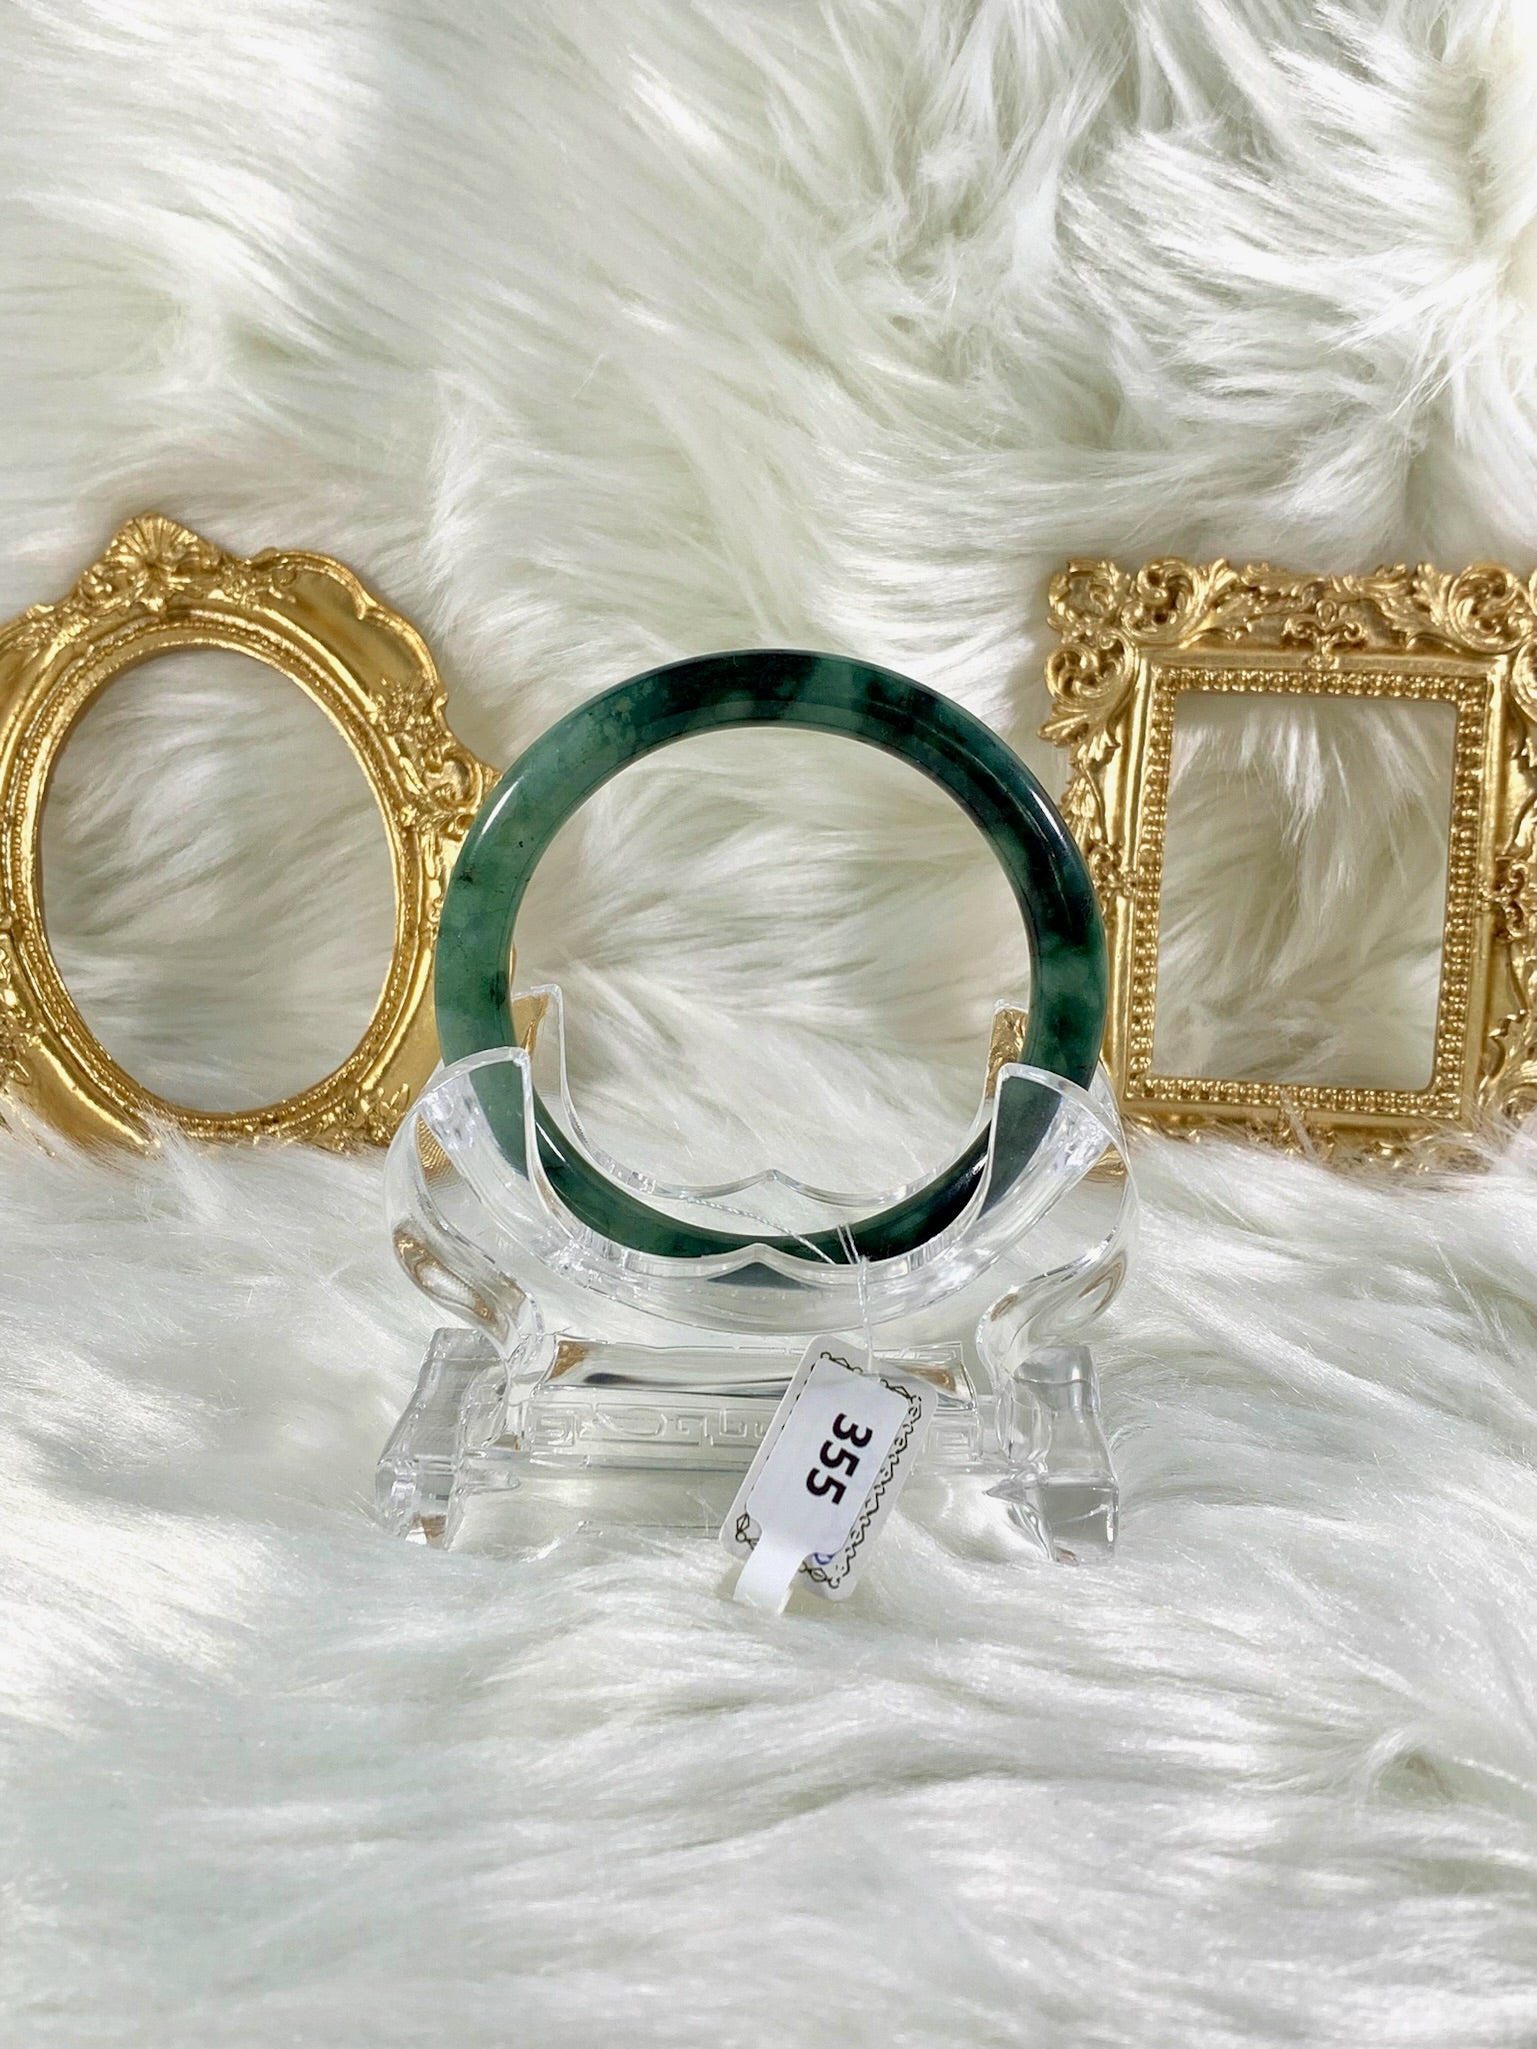 Grade A Natural Jade Bangle with certificate #248